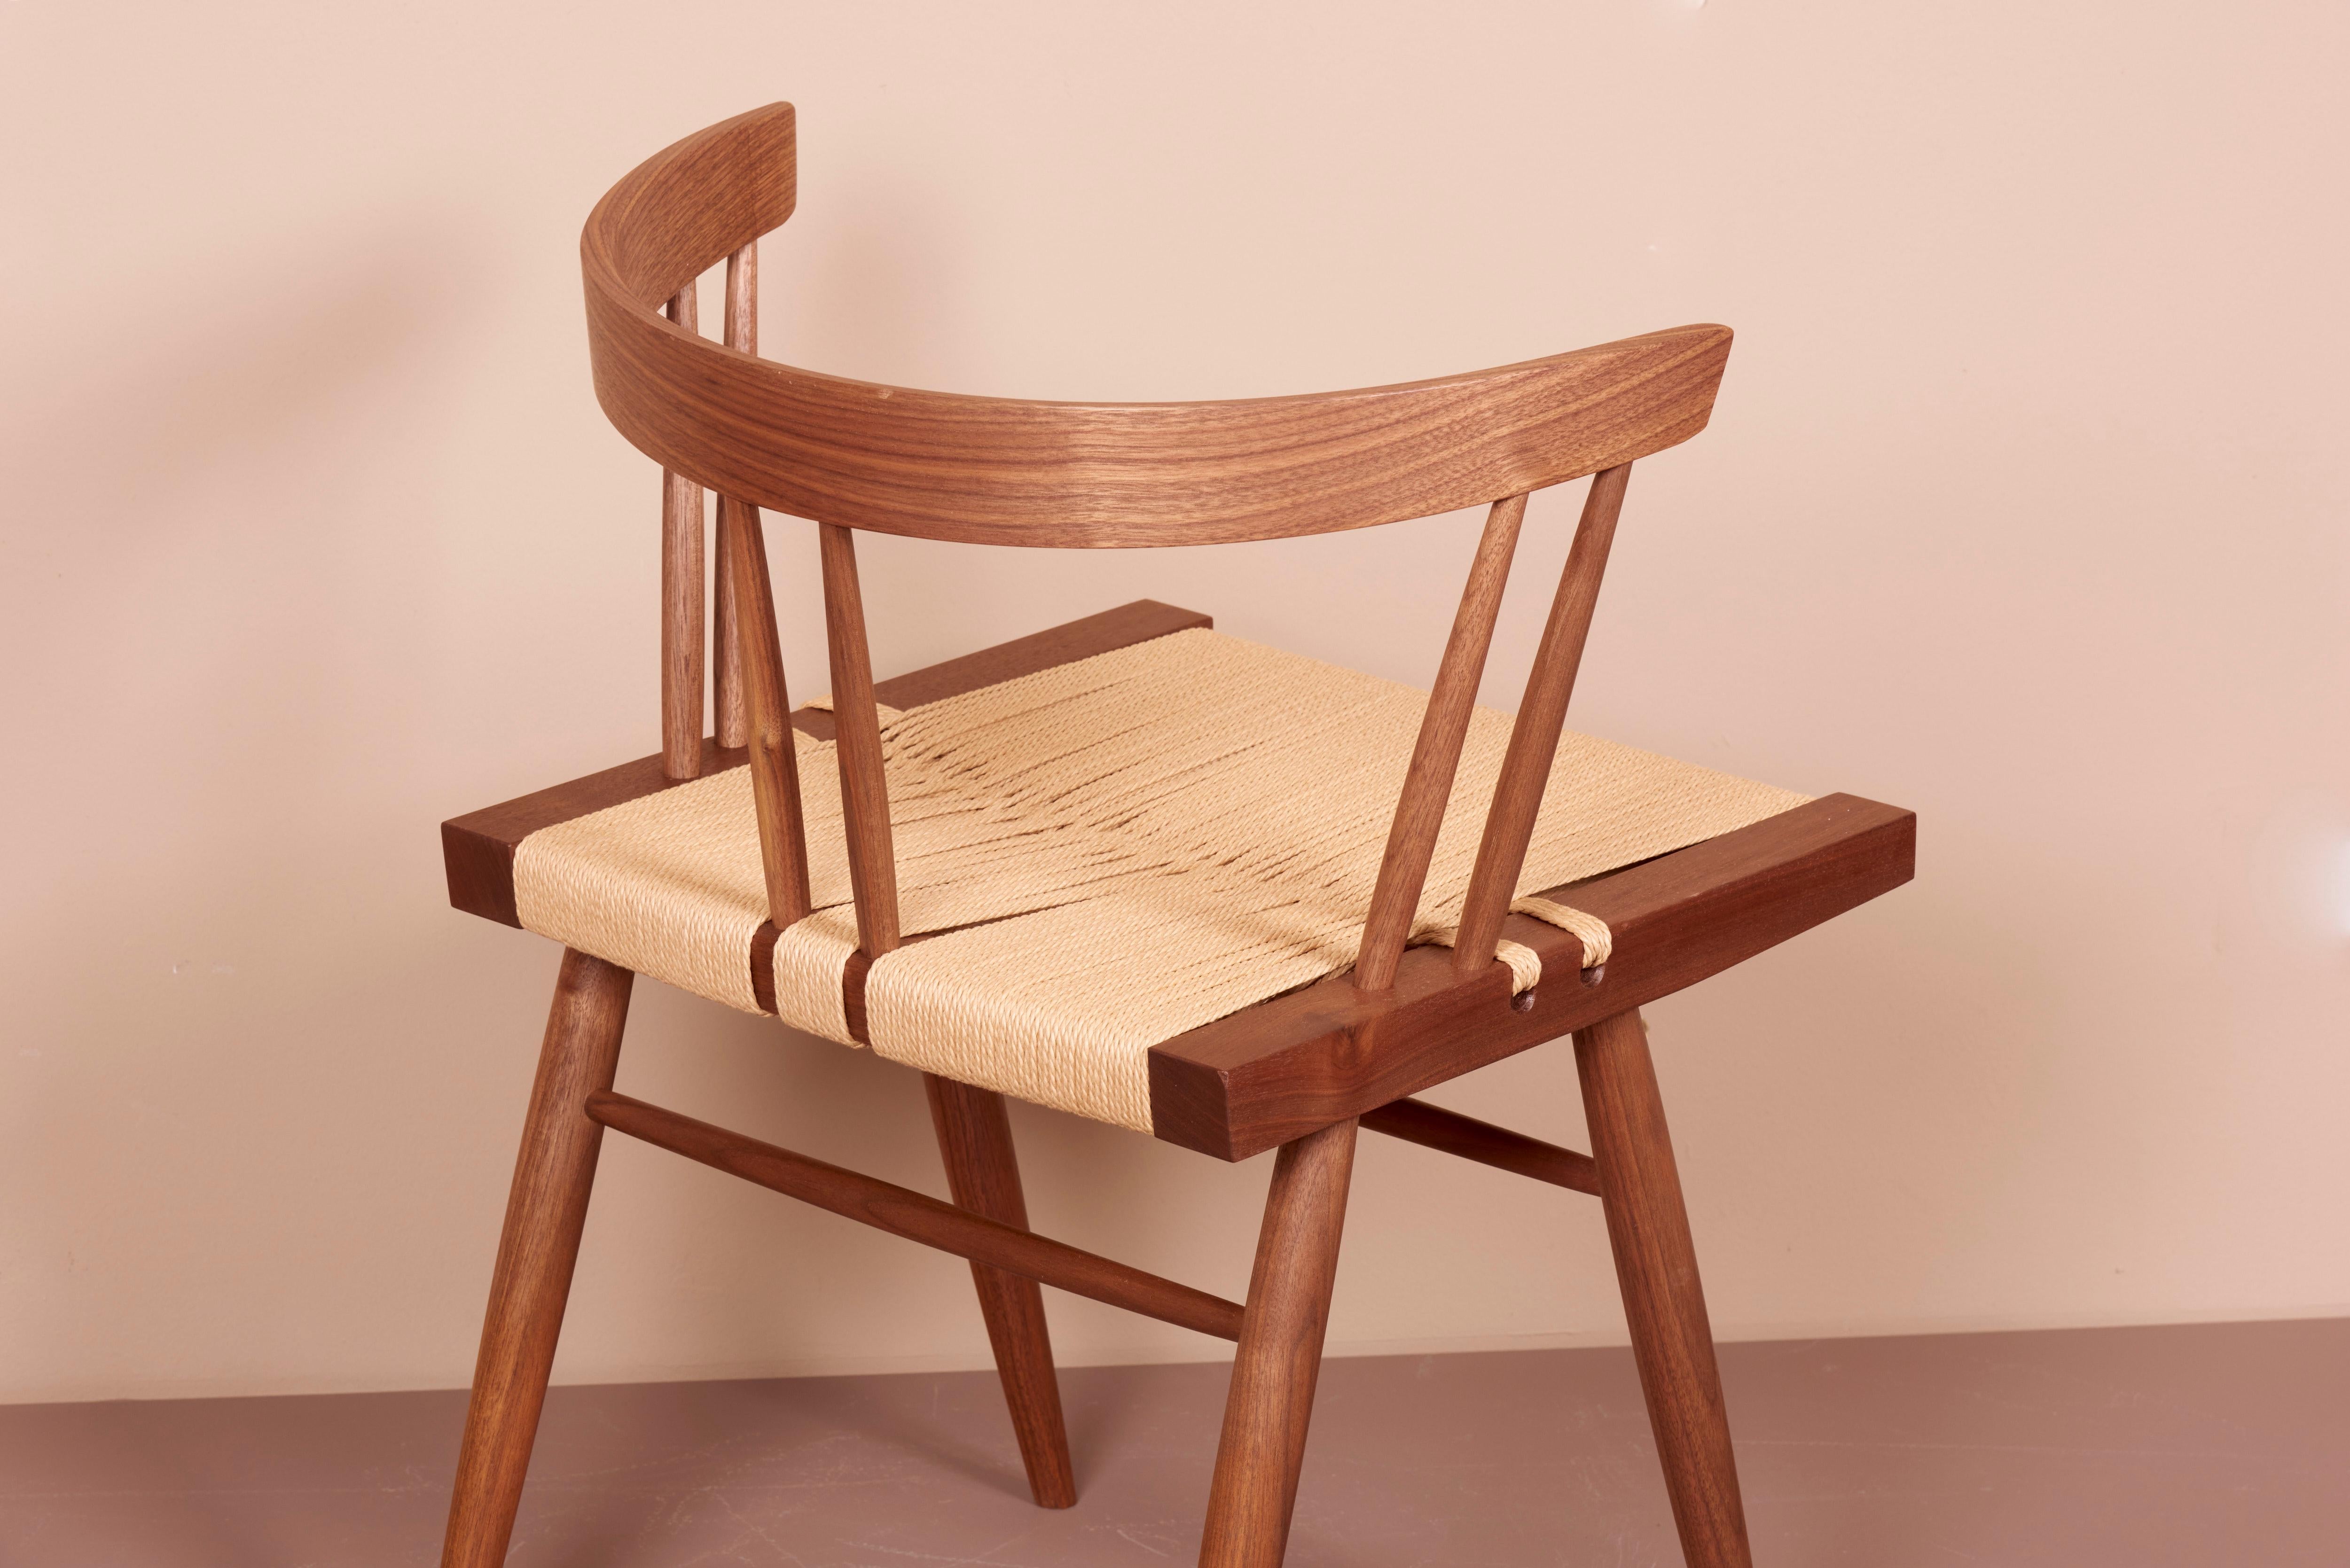 Seagrass Grass Seated Dining Chairs by George Nakashima Studio, US, 2022